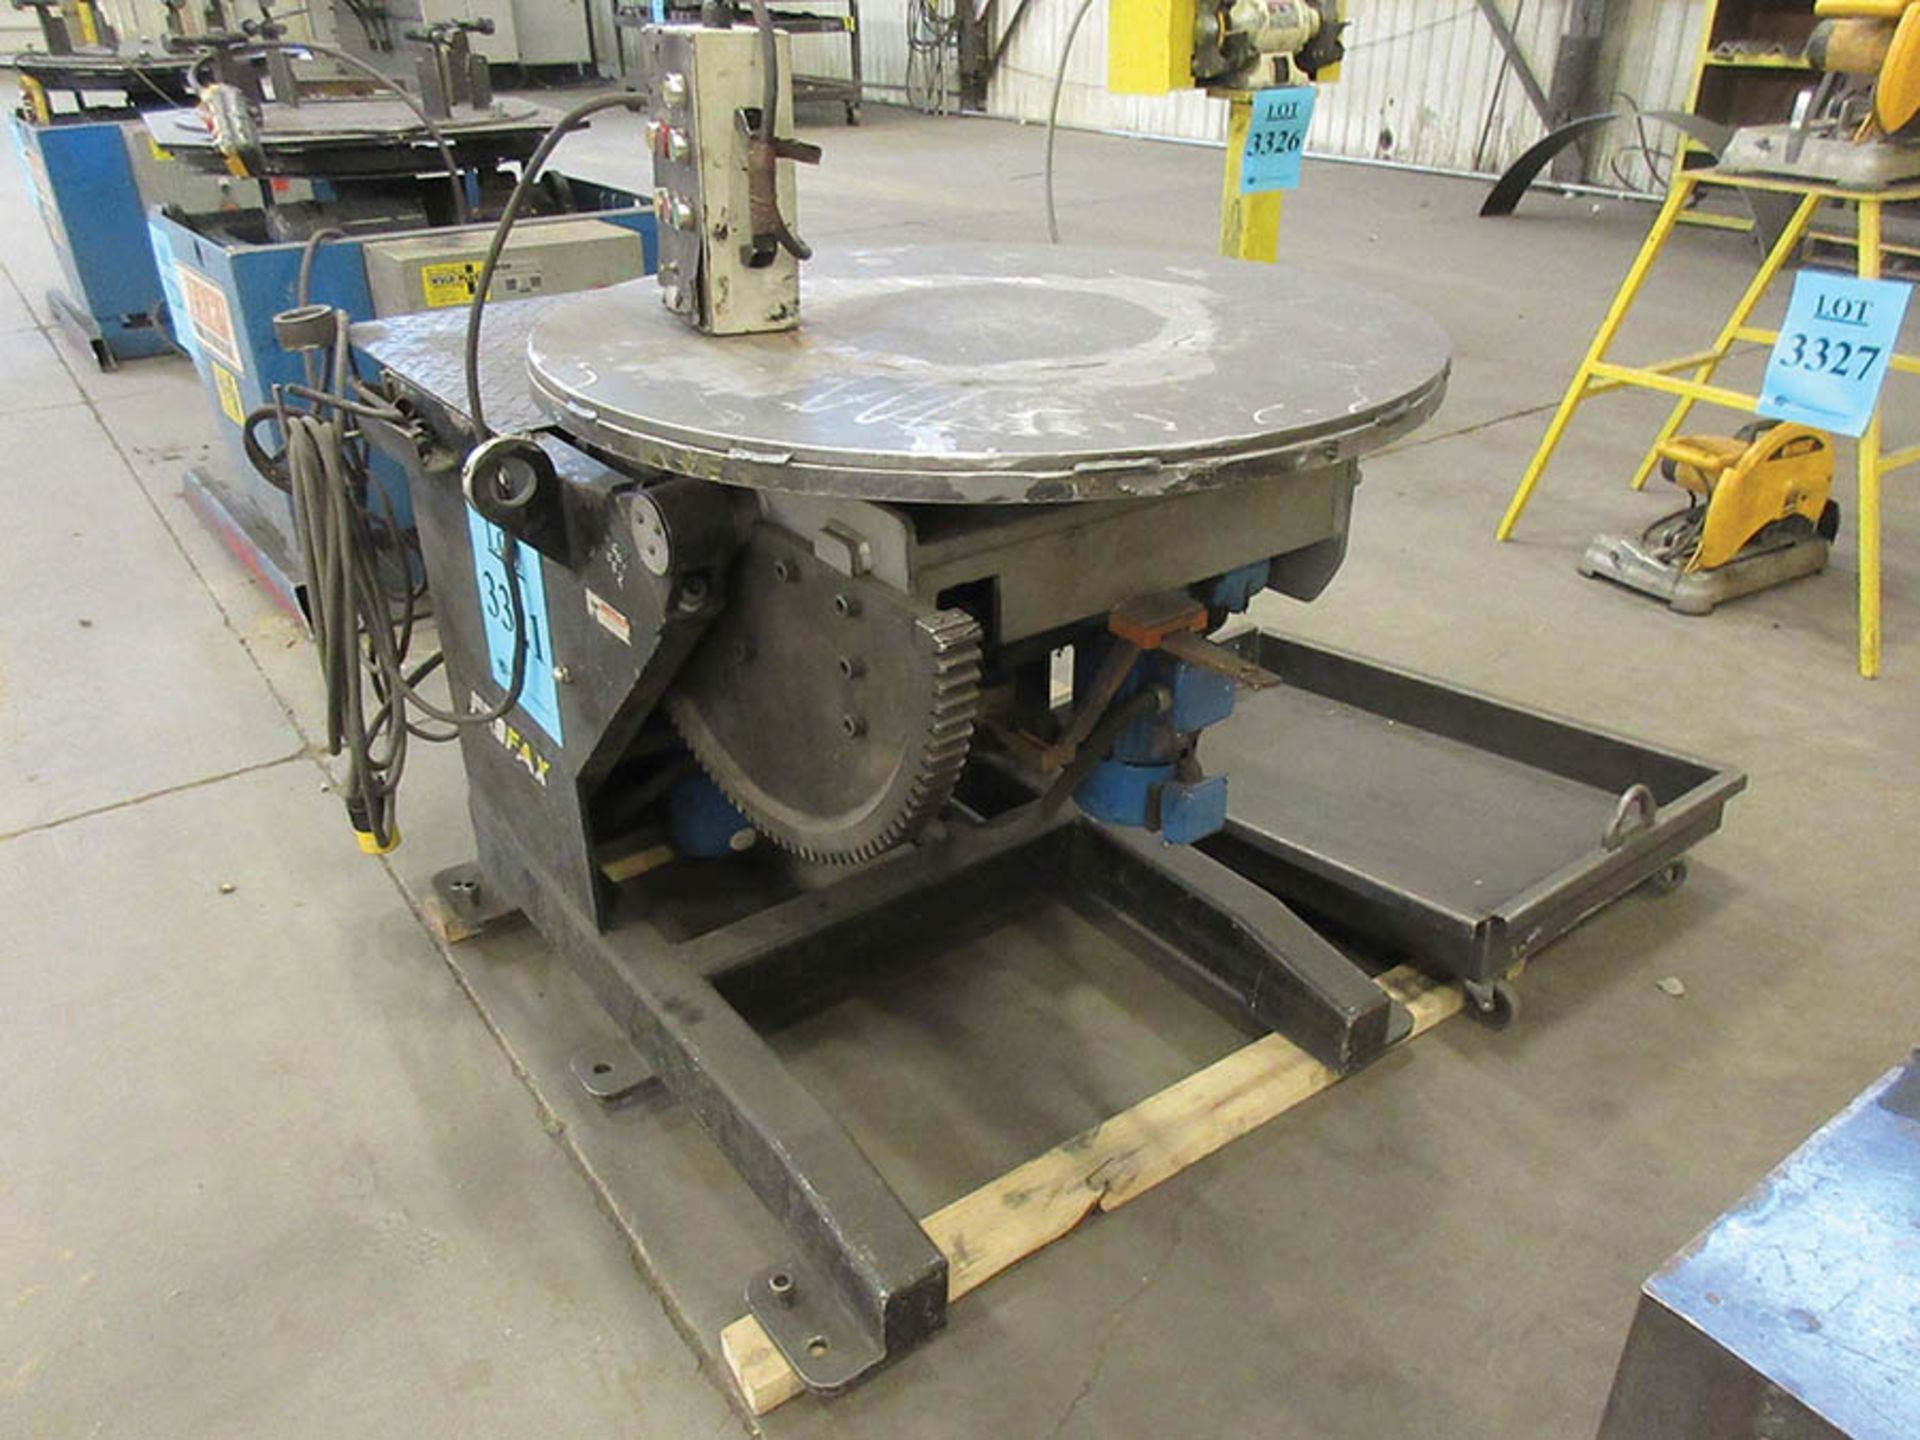 PROFAX WELDING POSITIONER, MODEL: WP-2000-4, LOAD 2000 LBS./V, CAP 3200 LBS./H, TABLE DIA. 35. - Image 2 of 4